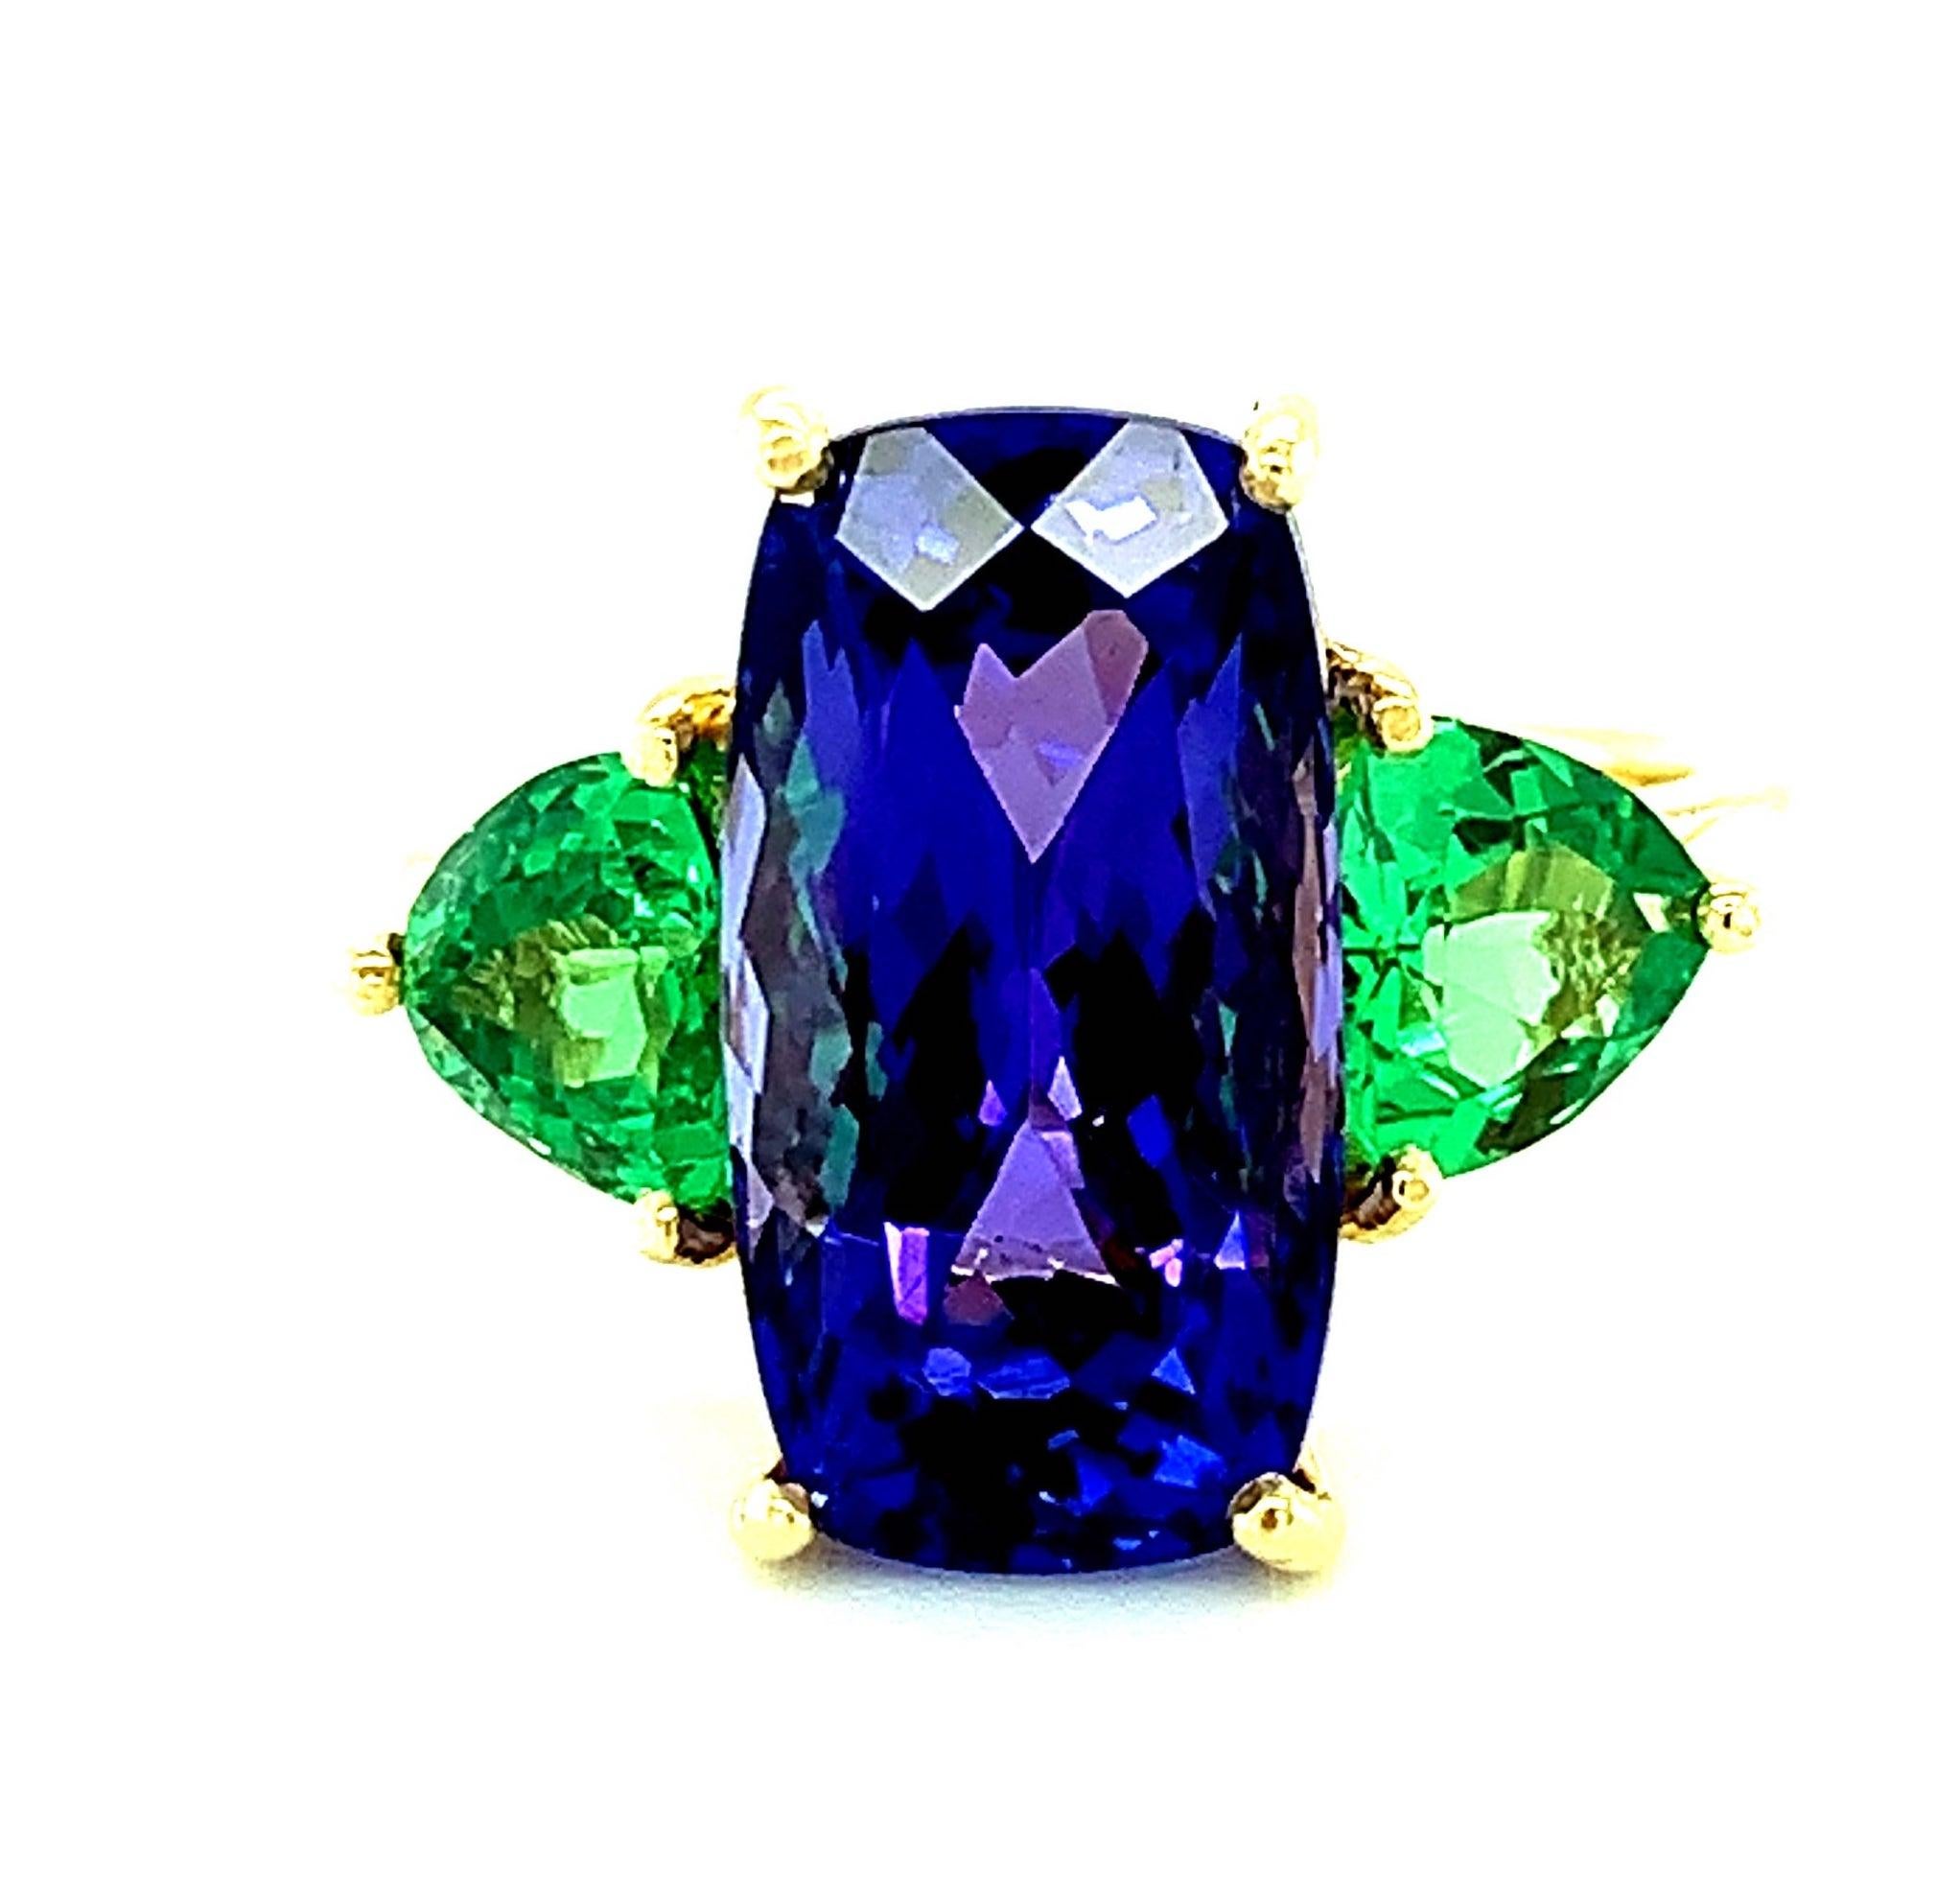 This stunning ring features a large, 7.44 carat cushion-shaped tanzanite and trillant-cut tsavorite garnets, all with spectacular color! The tanzanite has intense color and shows flashes of both blue and purple separately, which is a unique look,